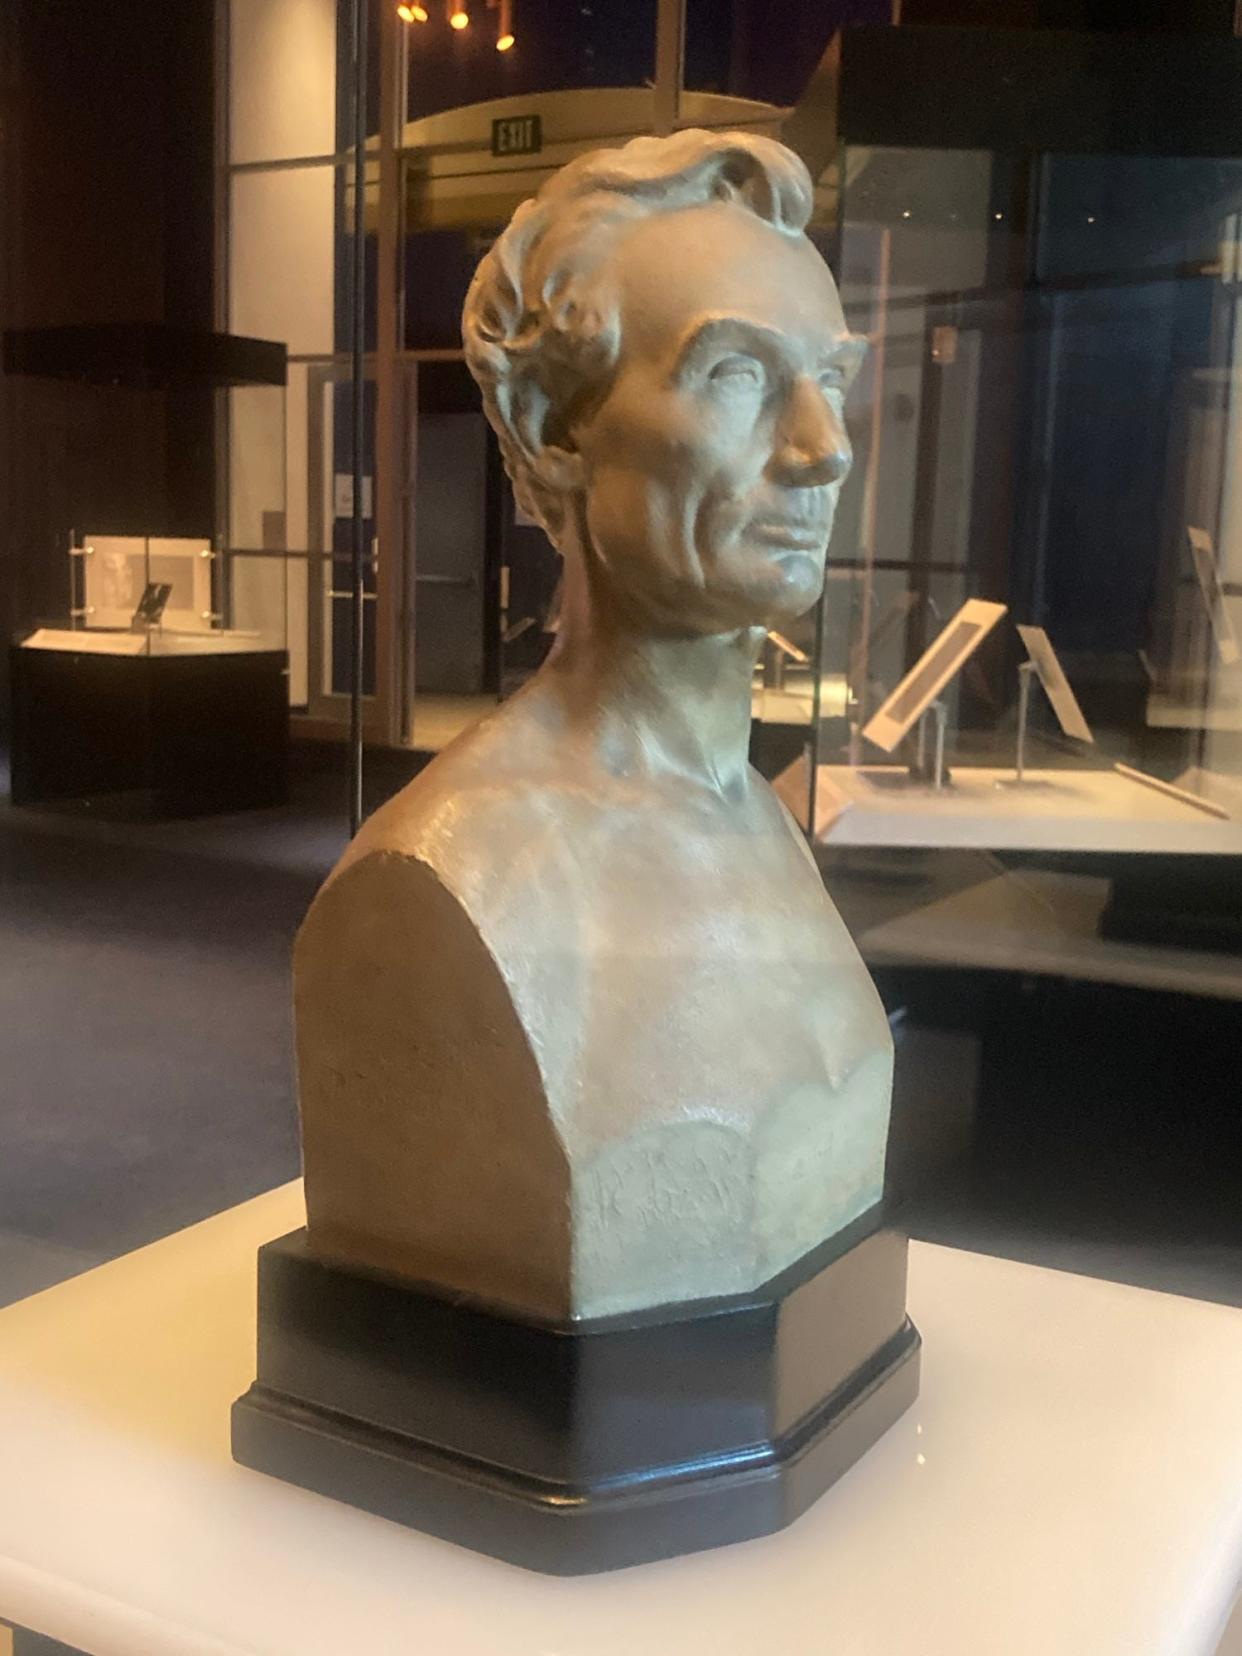 A bust of Abraham Lincoln, which once occupied the Lincoln home in Springfield, now sits in the Treasures Gallery at the Abraham Lincoln Presidential Library and Museum in Springfield, Ill. The bust, gifted to Lincoln by sculptor Leonard Volk, was purchased at an auction by Illinois First Lady MK Pritzker. She, in turn, gifted it to the ALPLM. It went on display late last week.